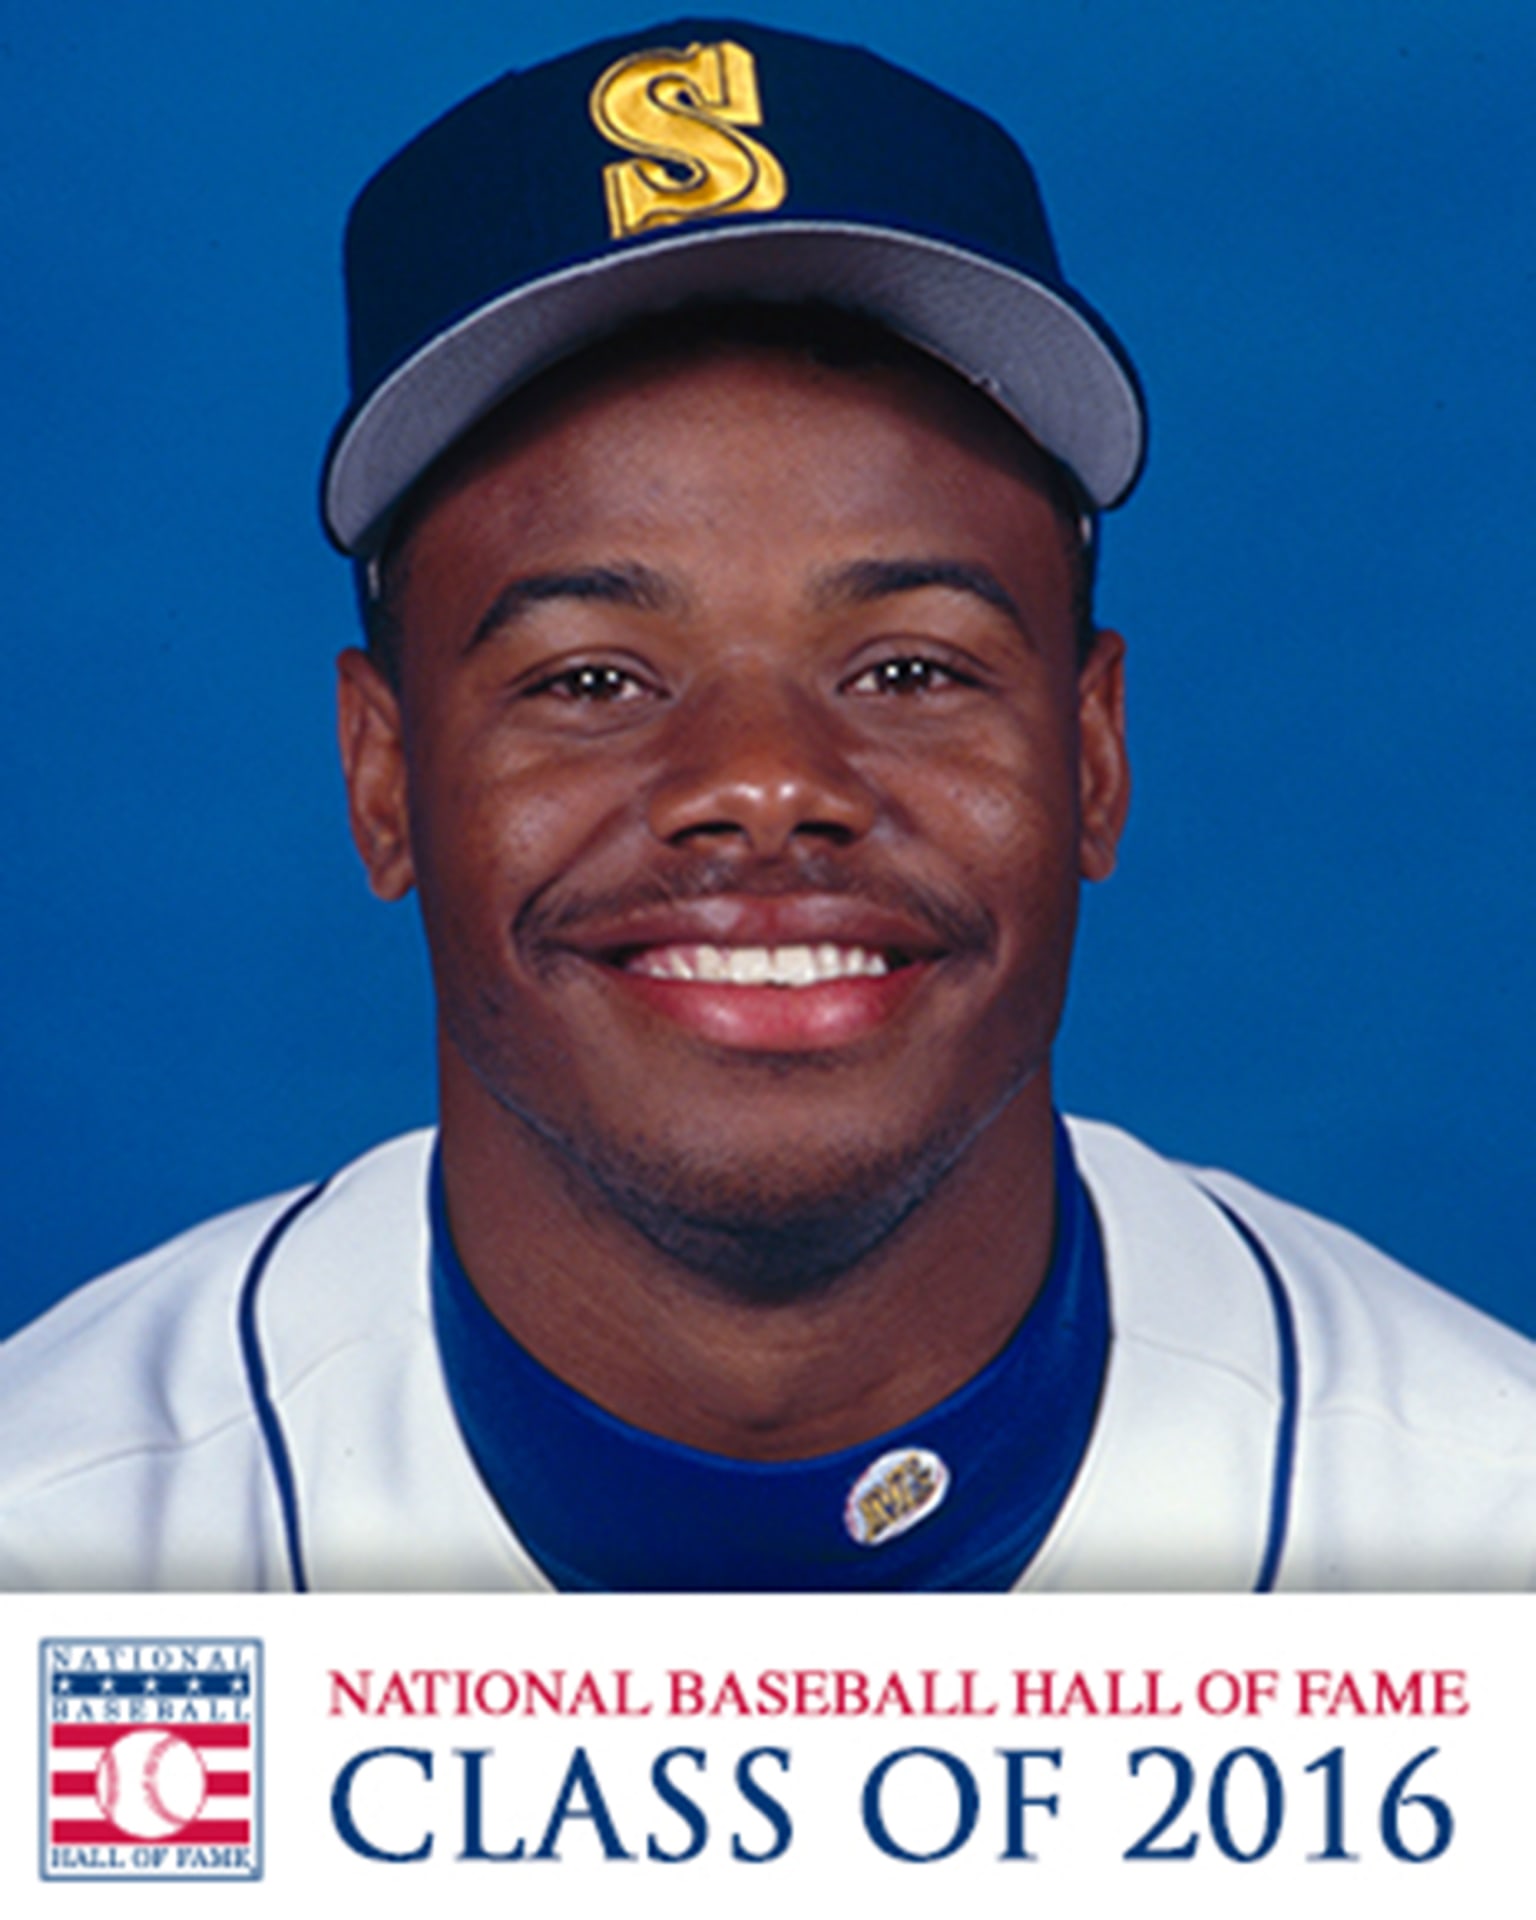 Mariners Care Charity Night: Ken Griffey Jr. Hall of Fame